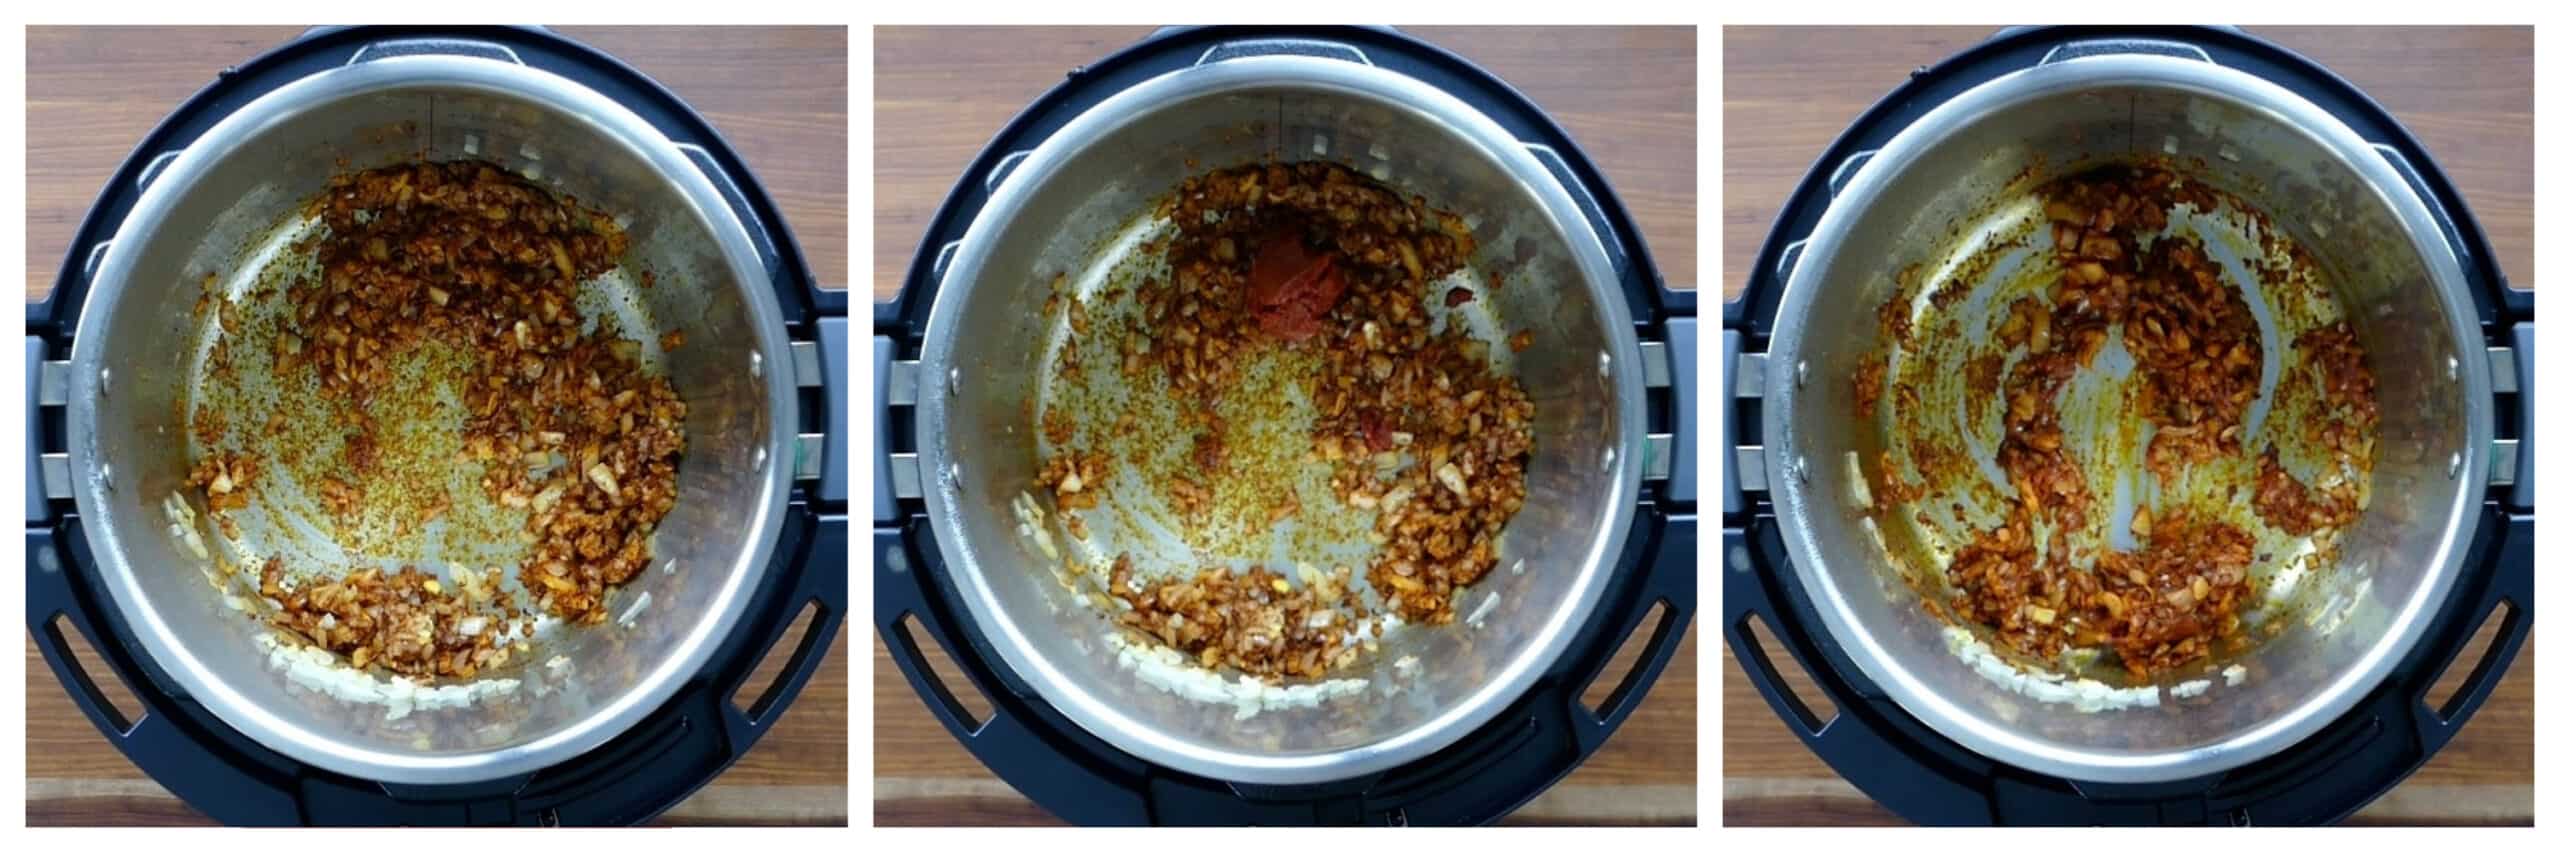 Instant Pot Misir wot instructions collage - onion mix sauteed, tomato paste added and stirred